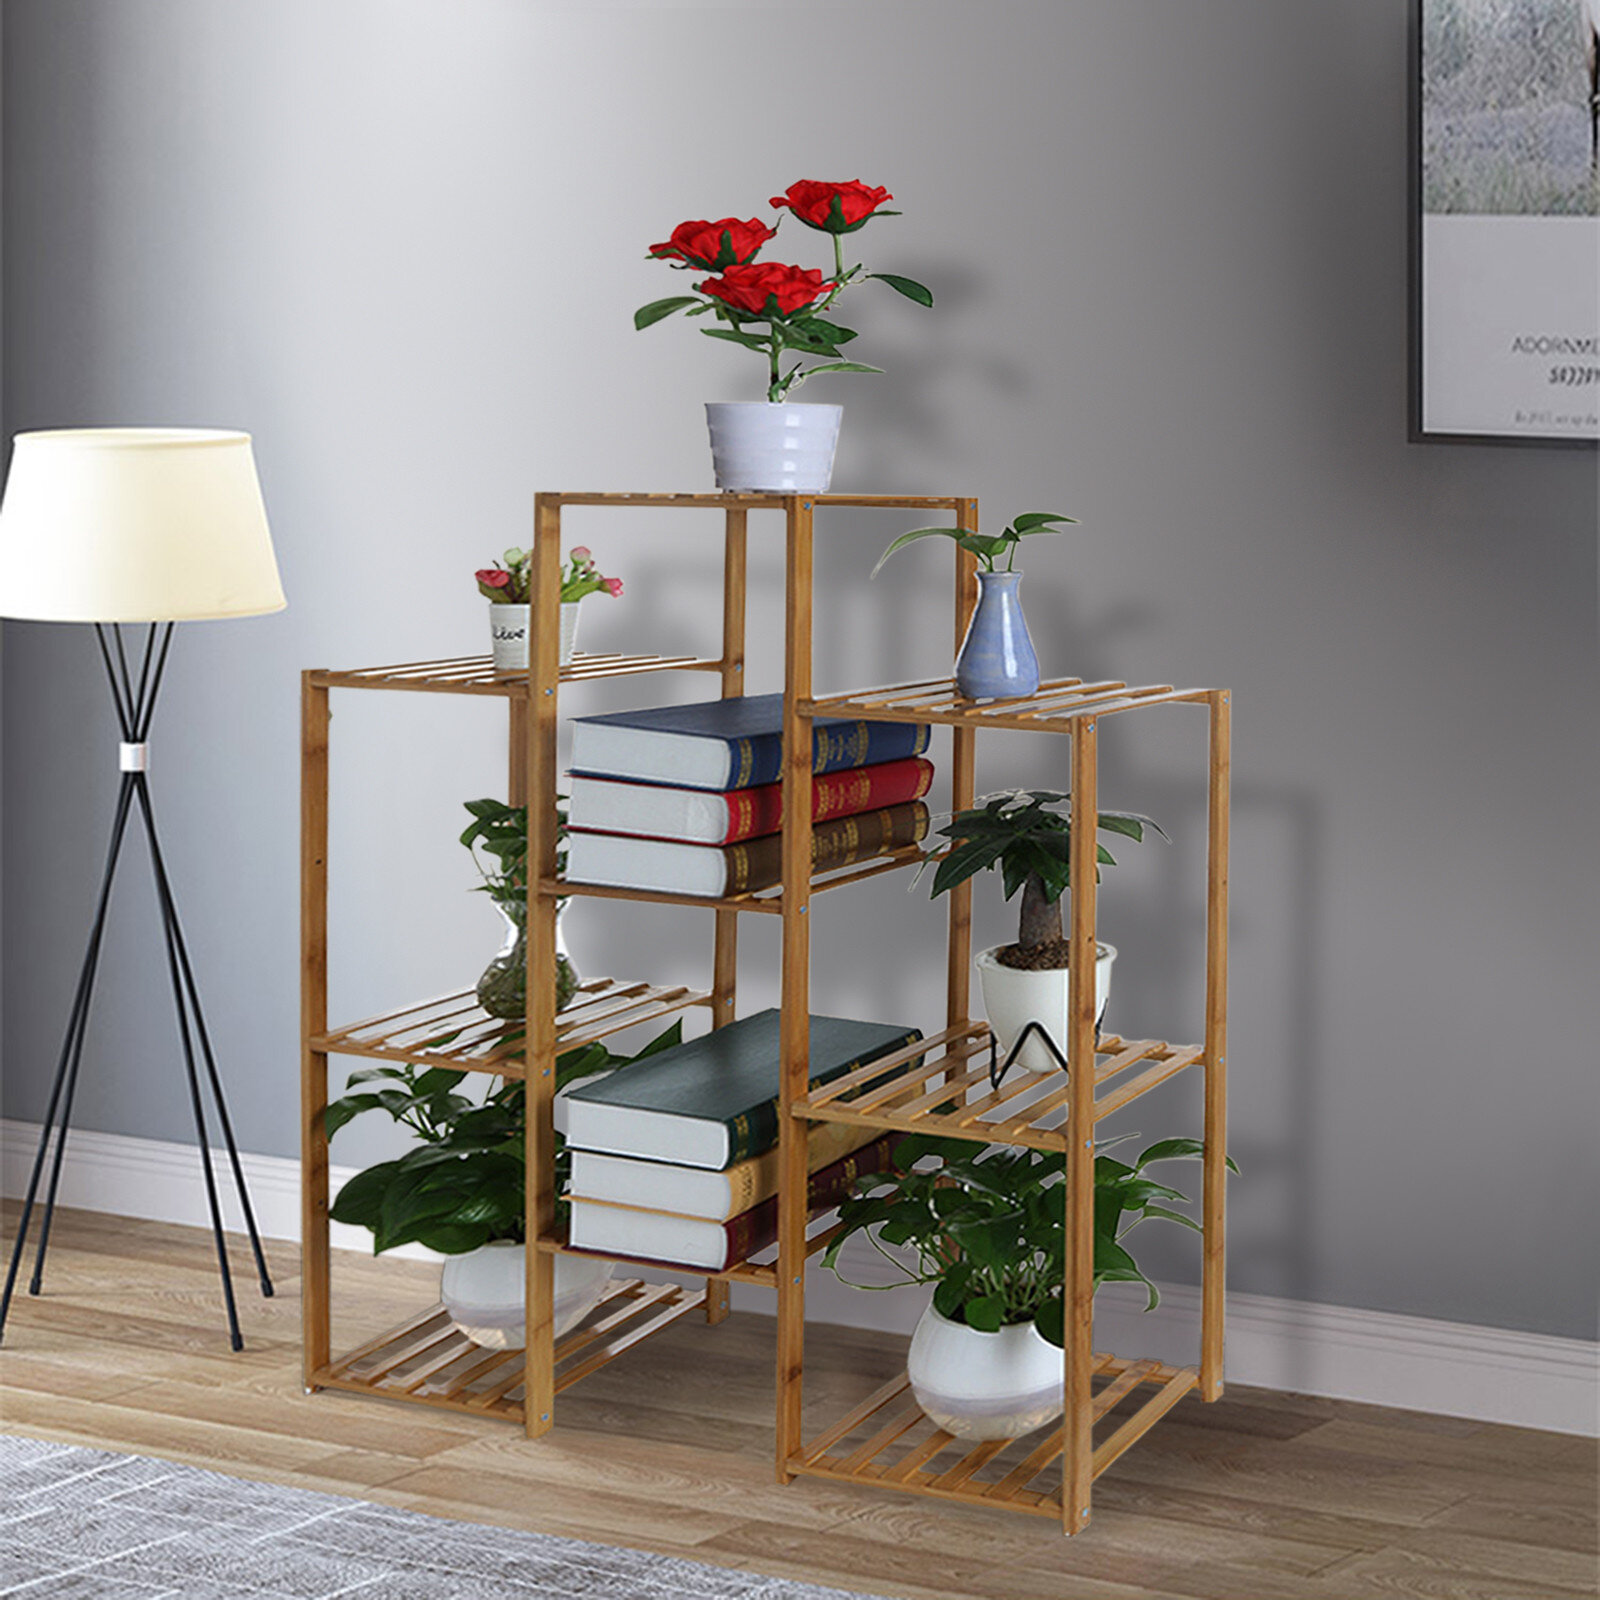 Details about   Multi-tiered Wood Plant Stand Outdoor/Indoor Flower Rack Display Shelving Unit 